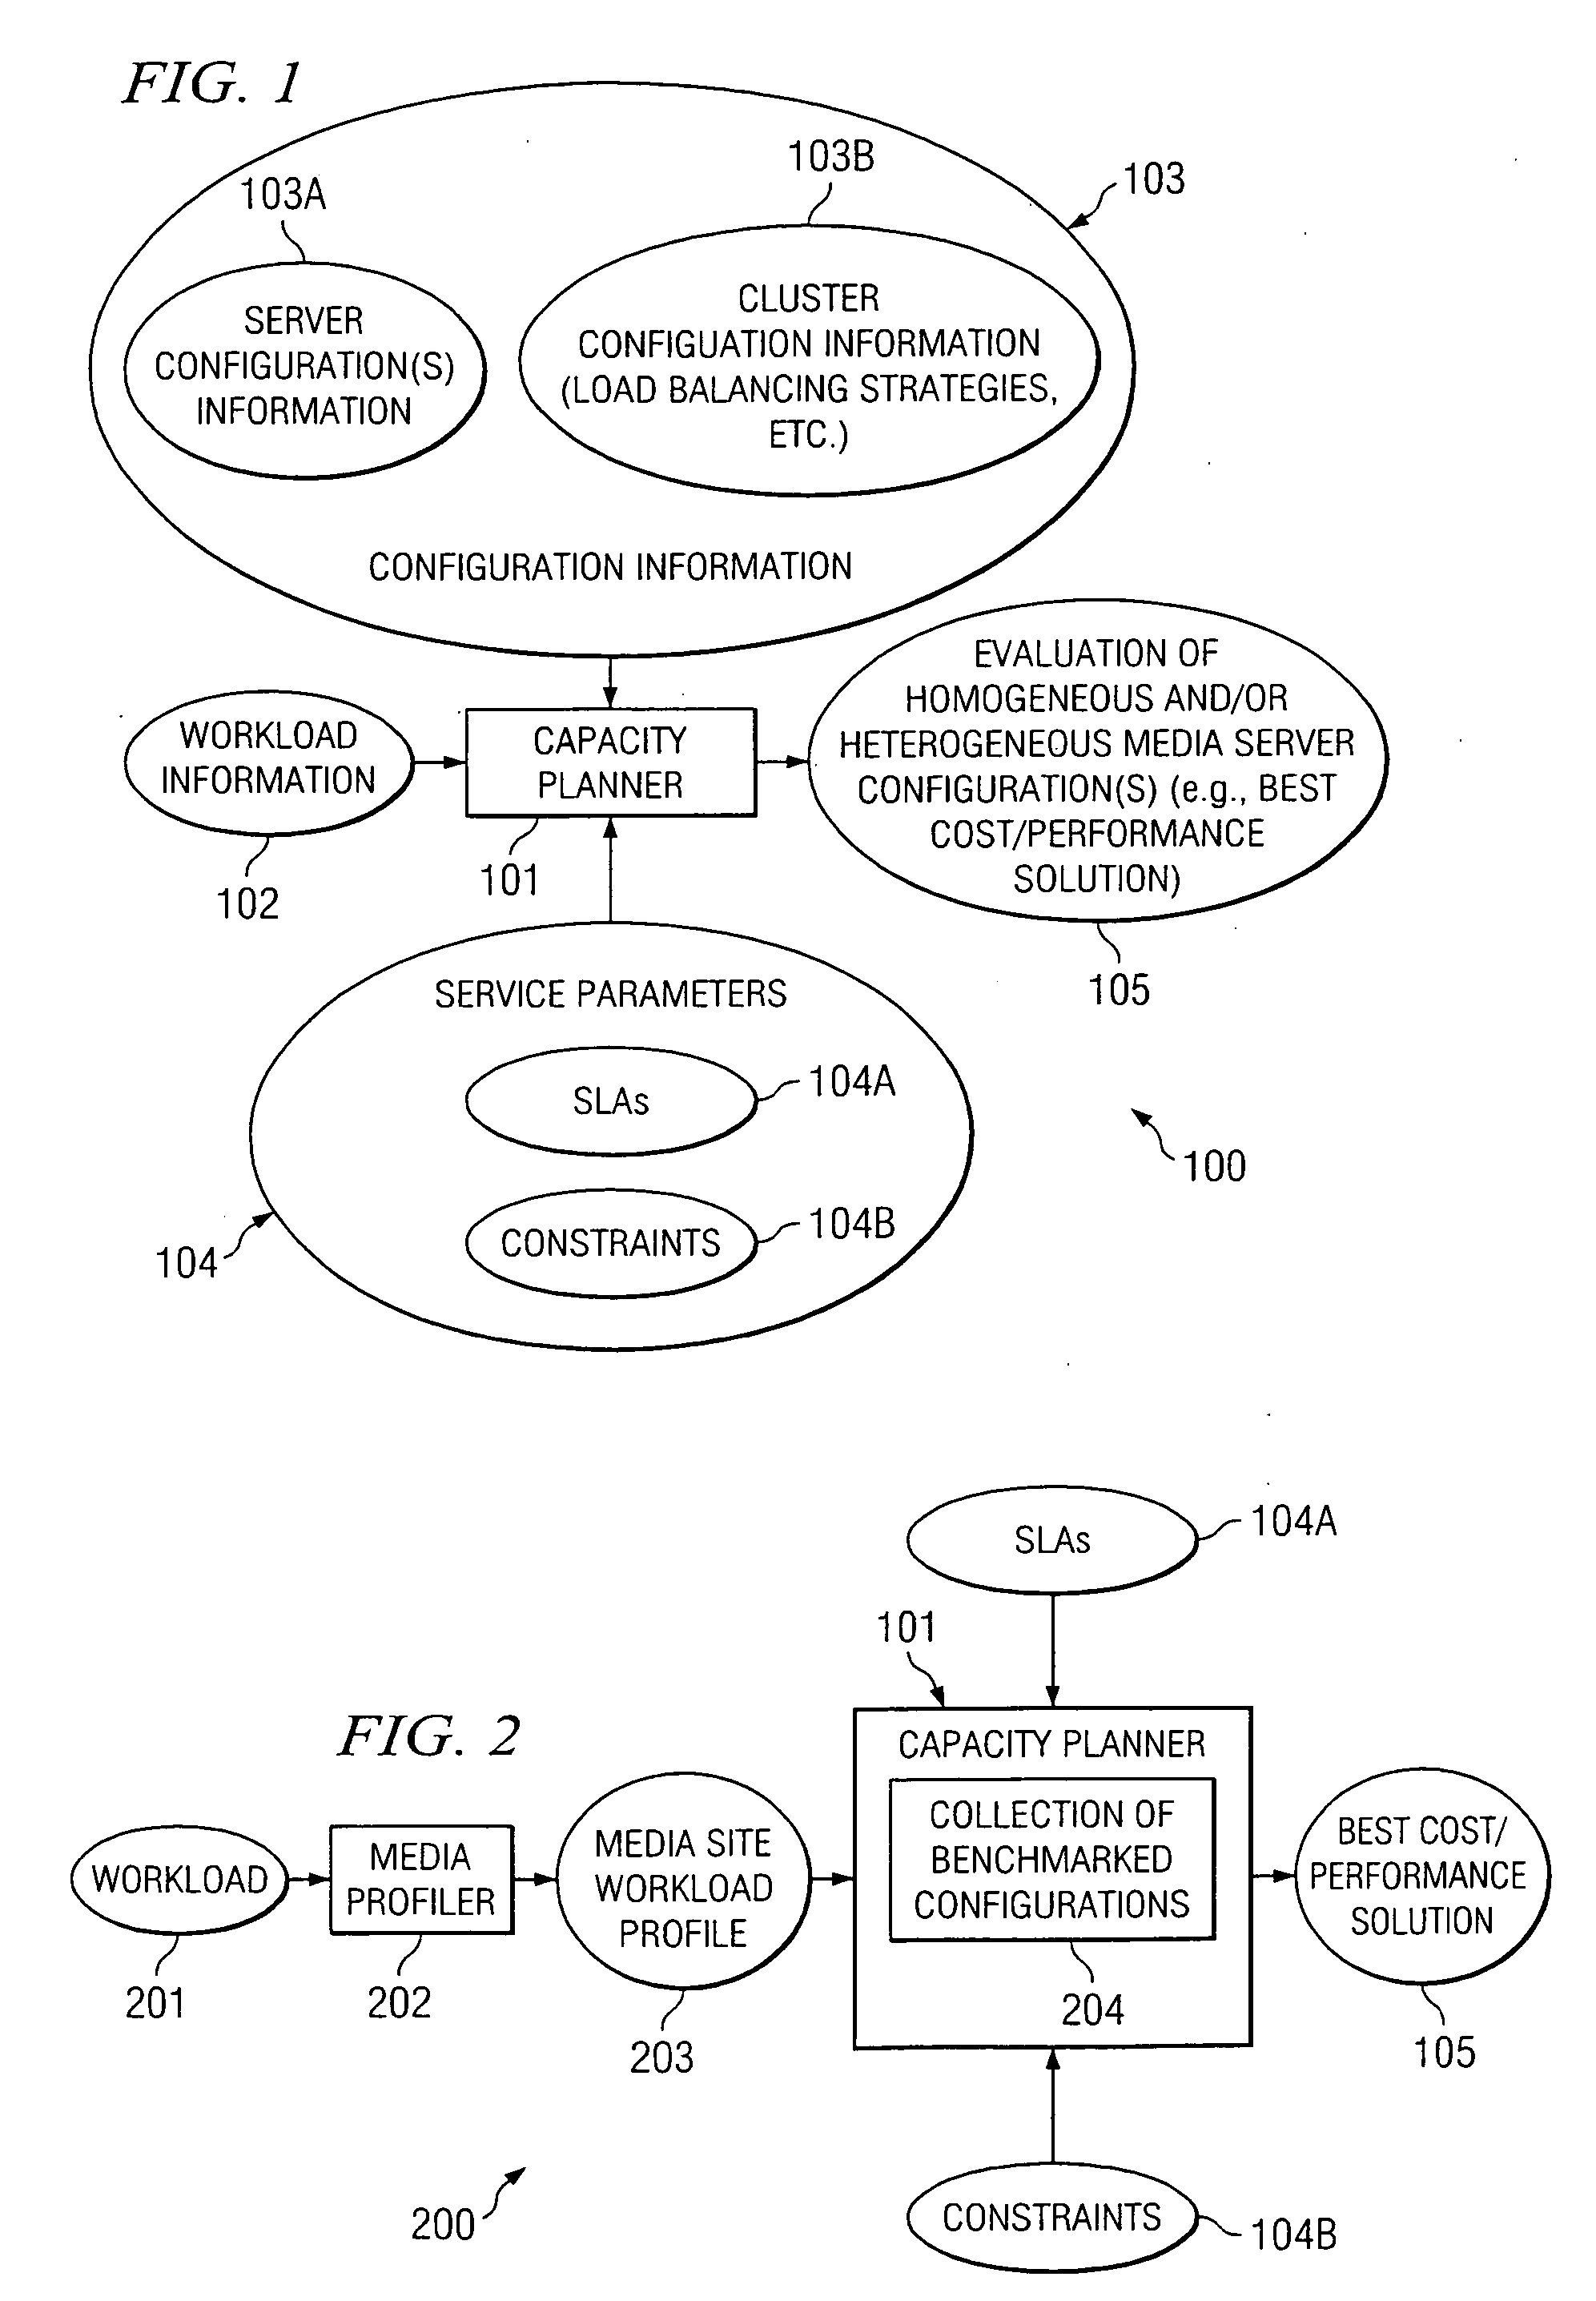 System and method for evaluating capacity of a heterogeneous media server configuration for supporting an expected workload